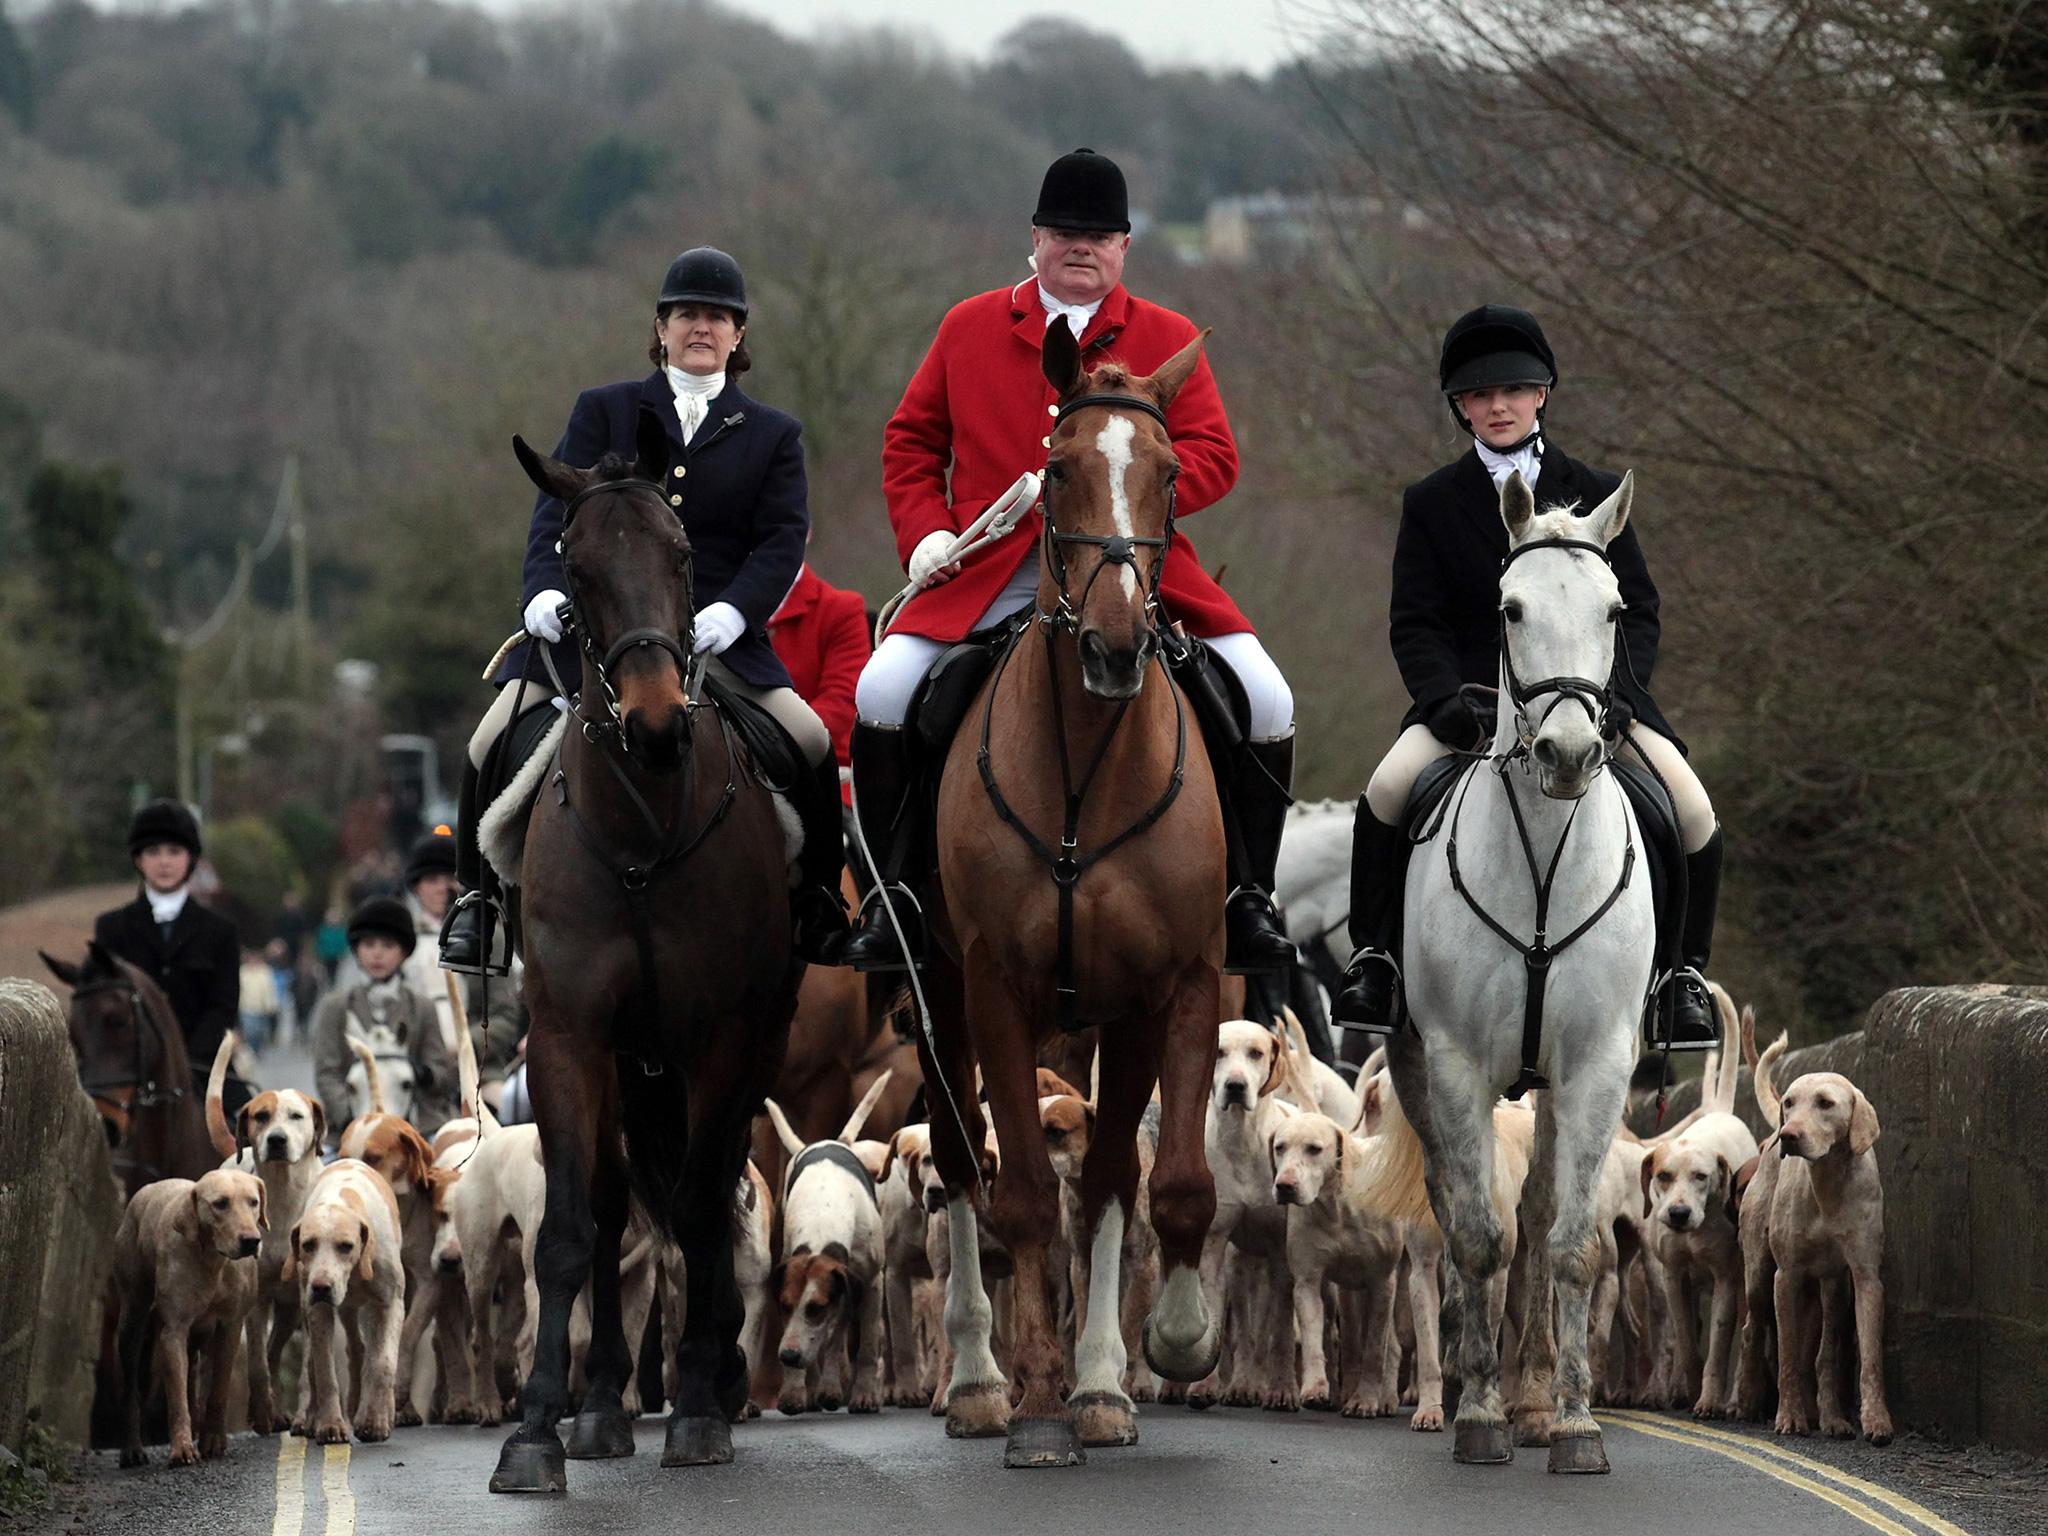 The Prime Minister promised last month to hold a parliamentary vote on repealing the 2004 Hunting Act if the Tories win